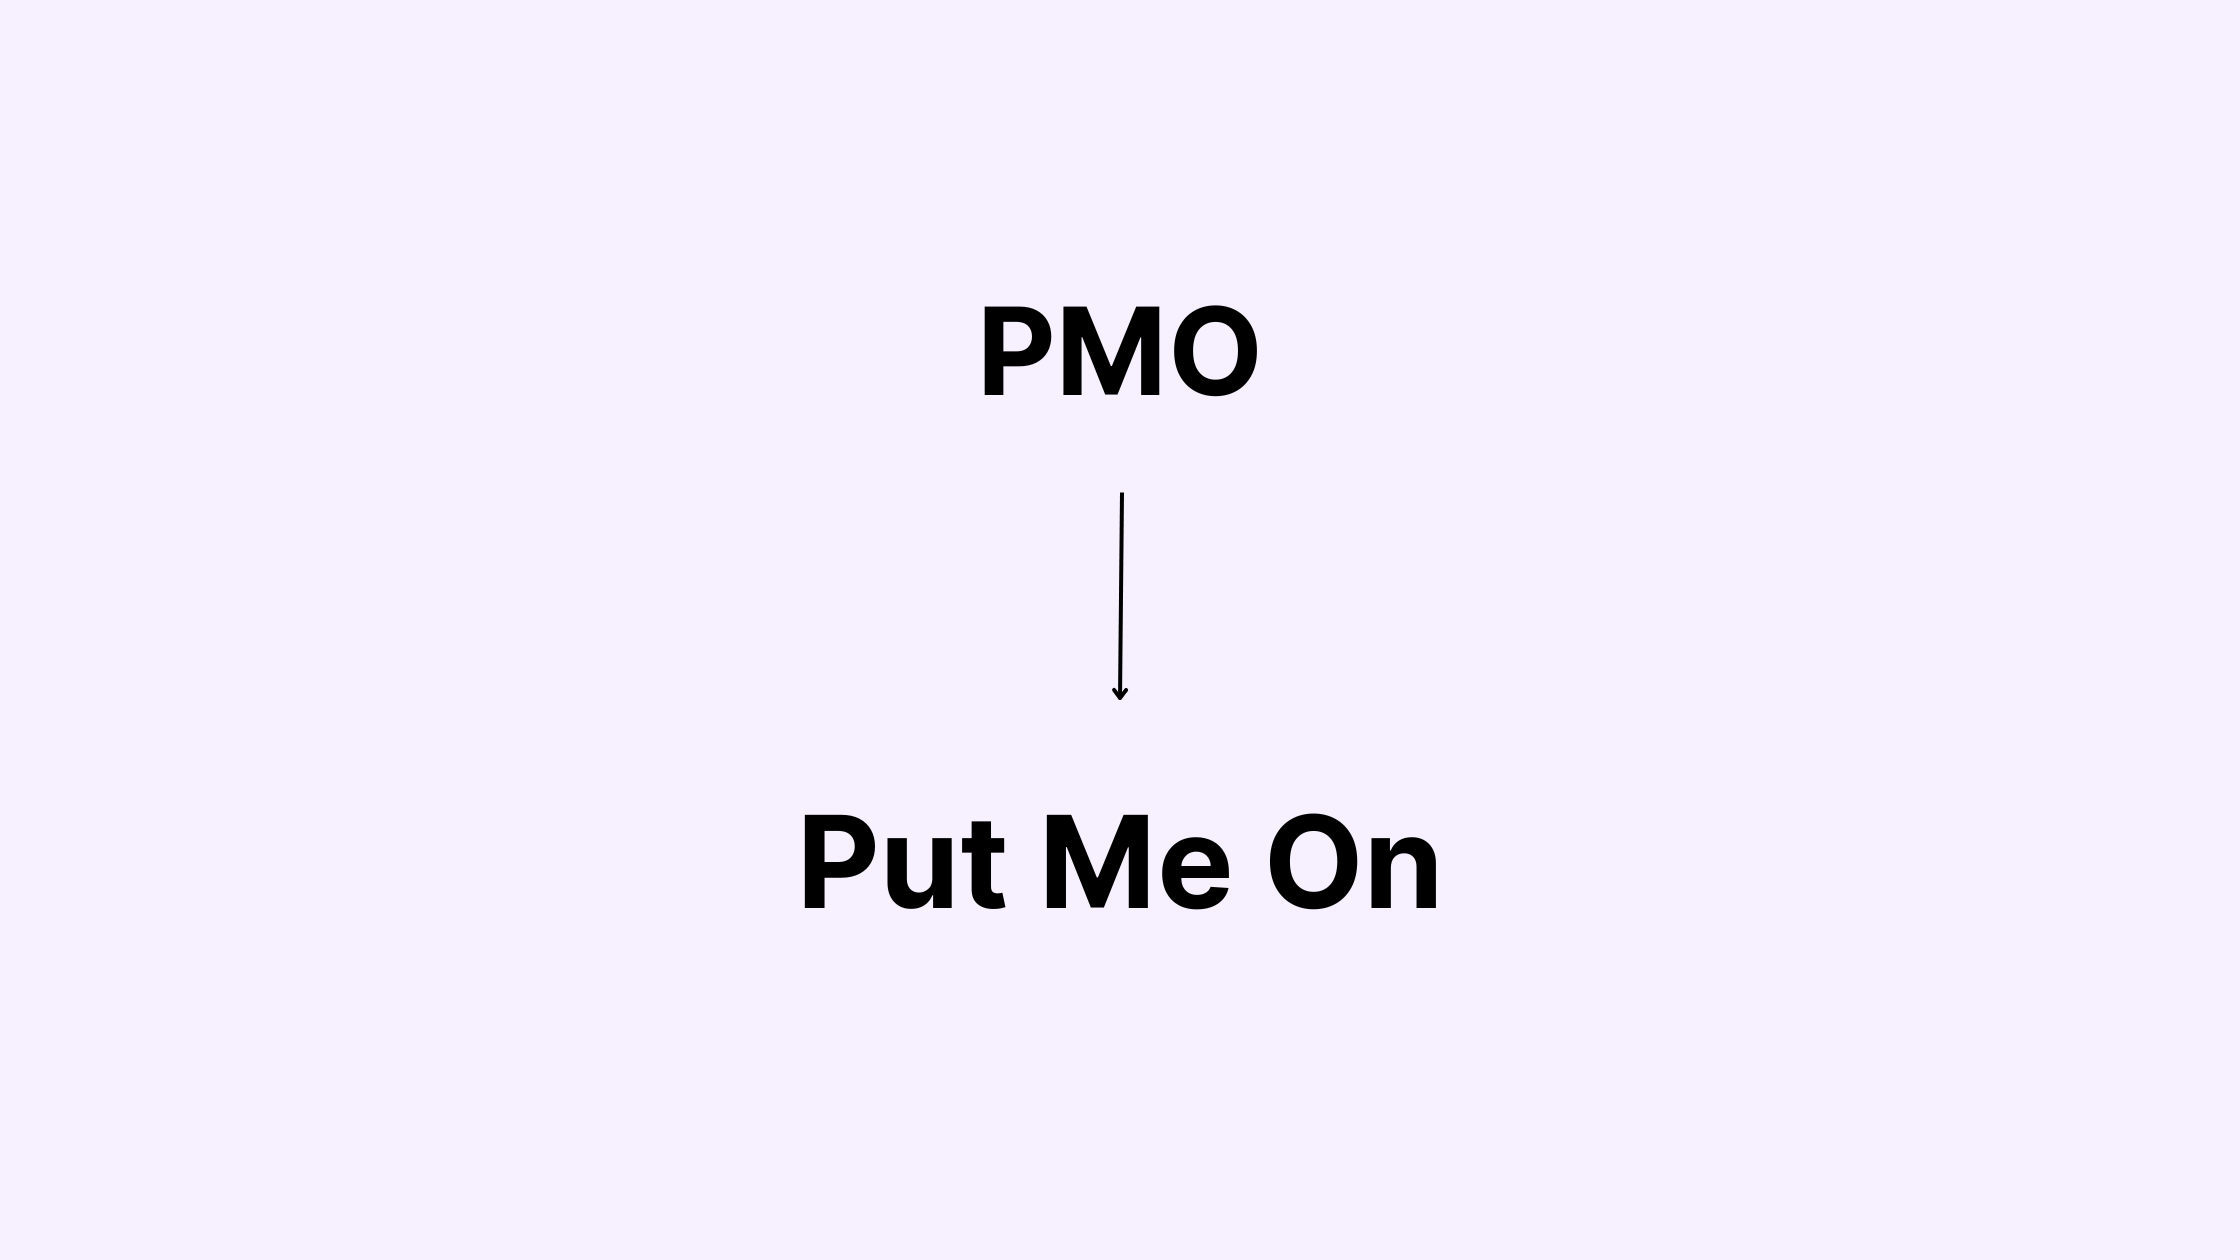 What does PMO mean on Instagram